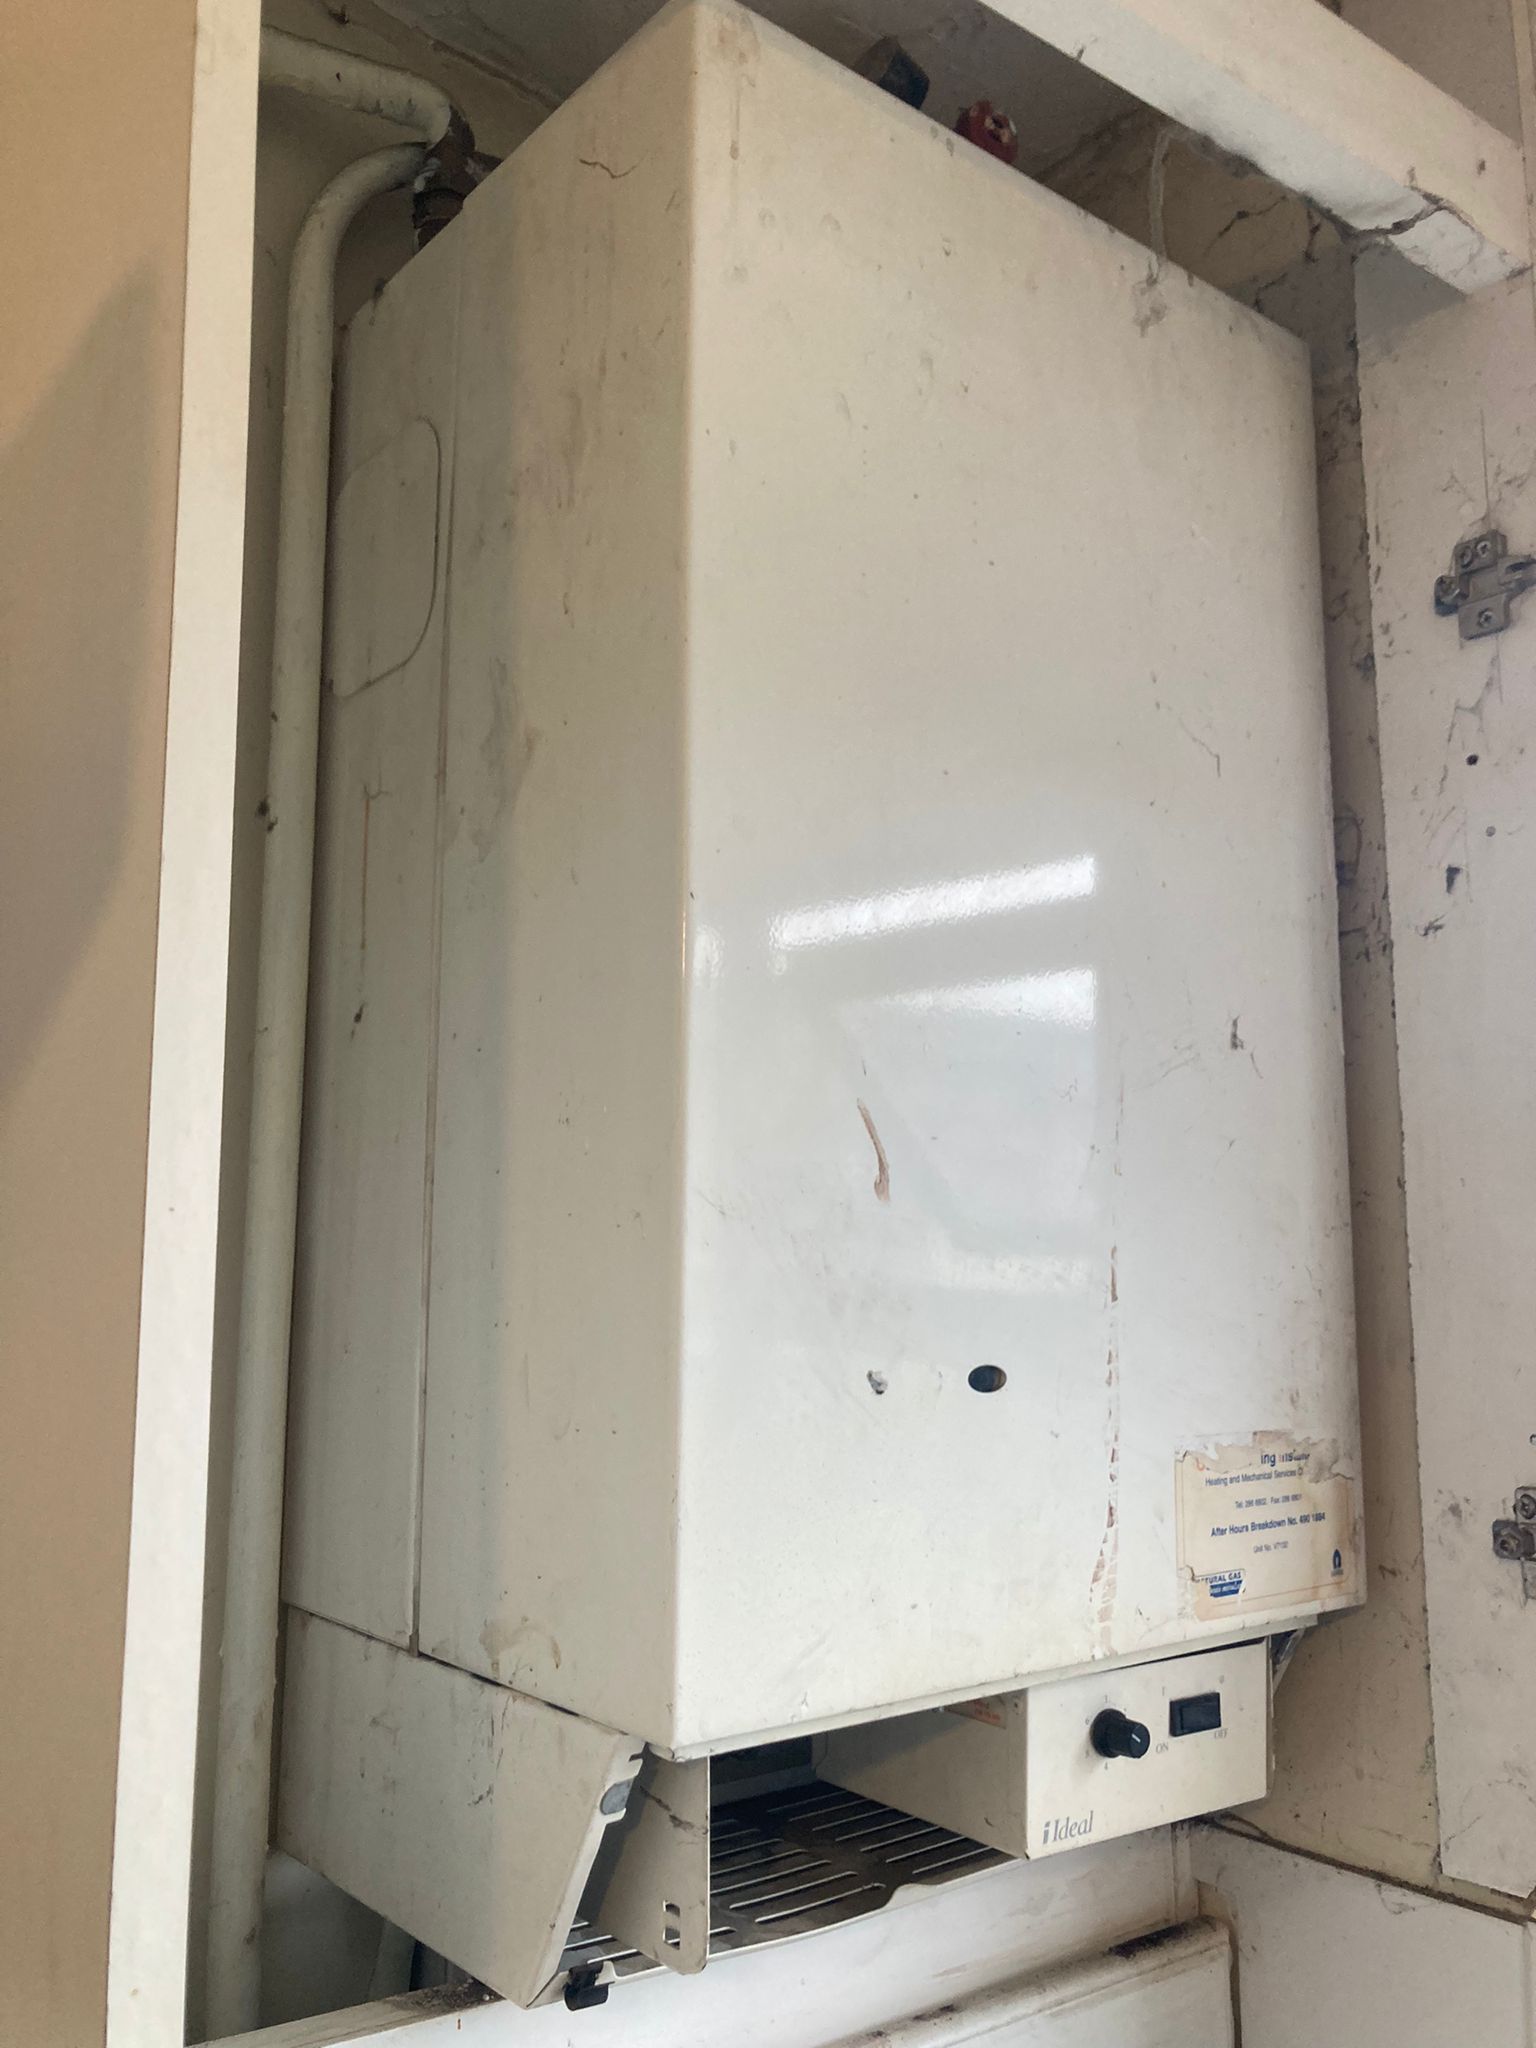 Old Boiler in need of replacement